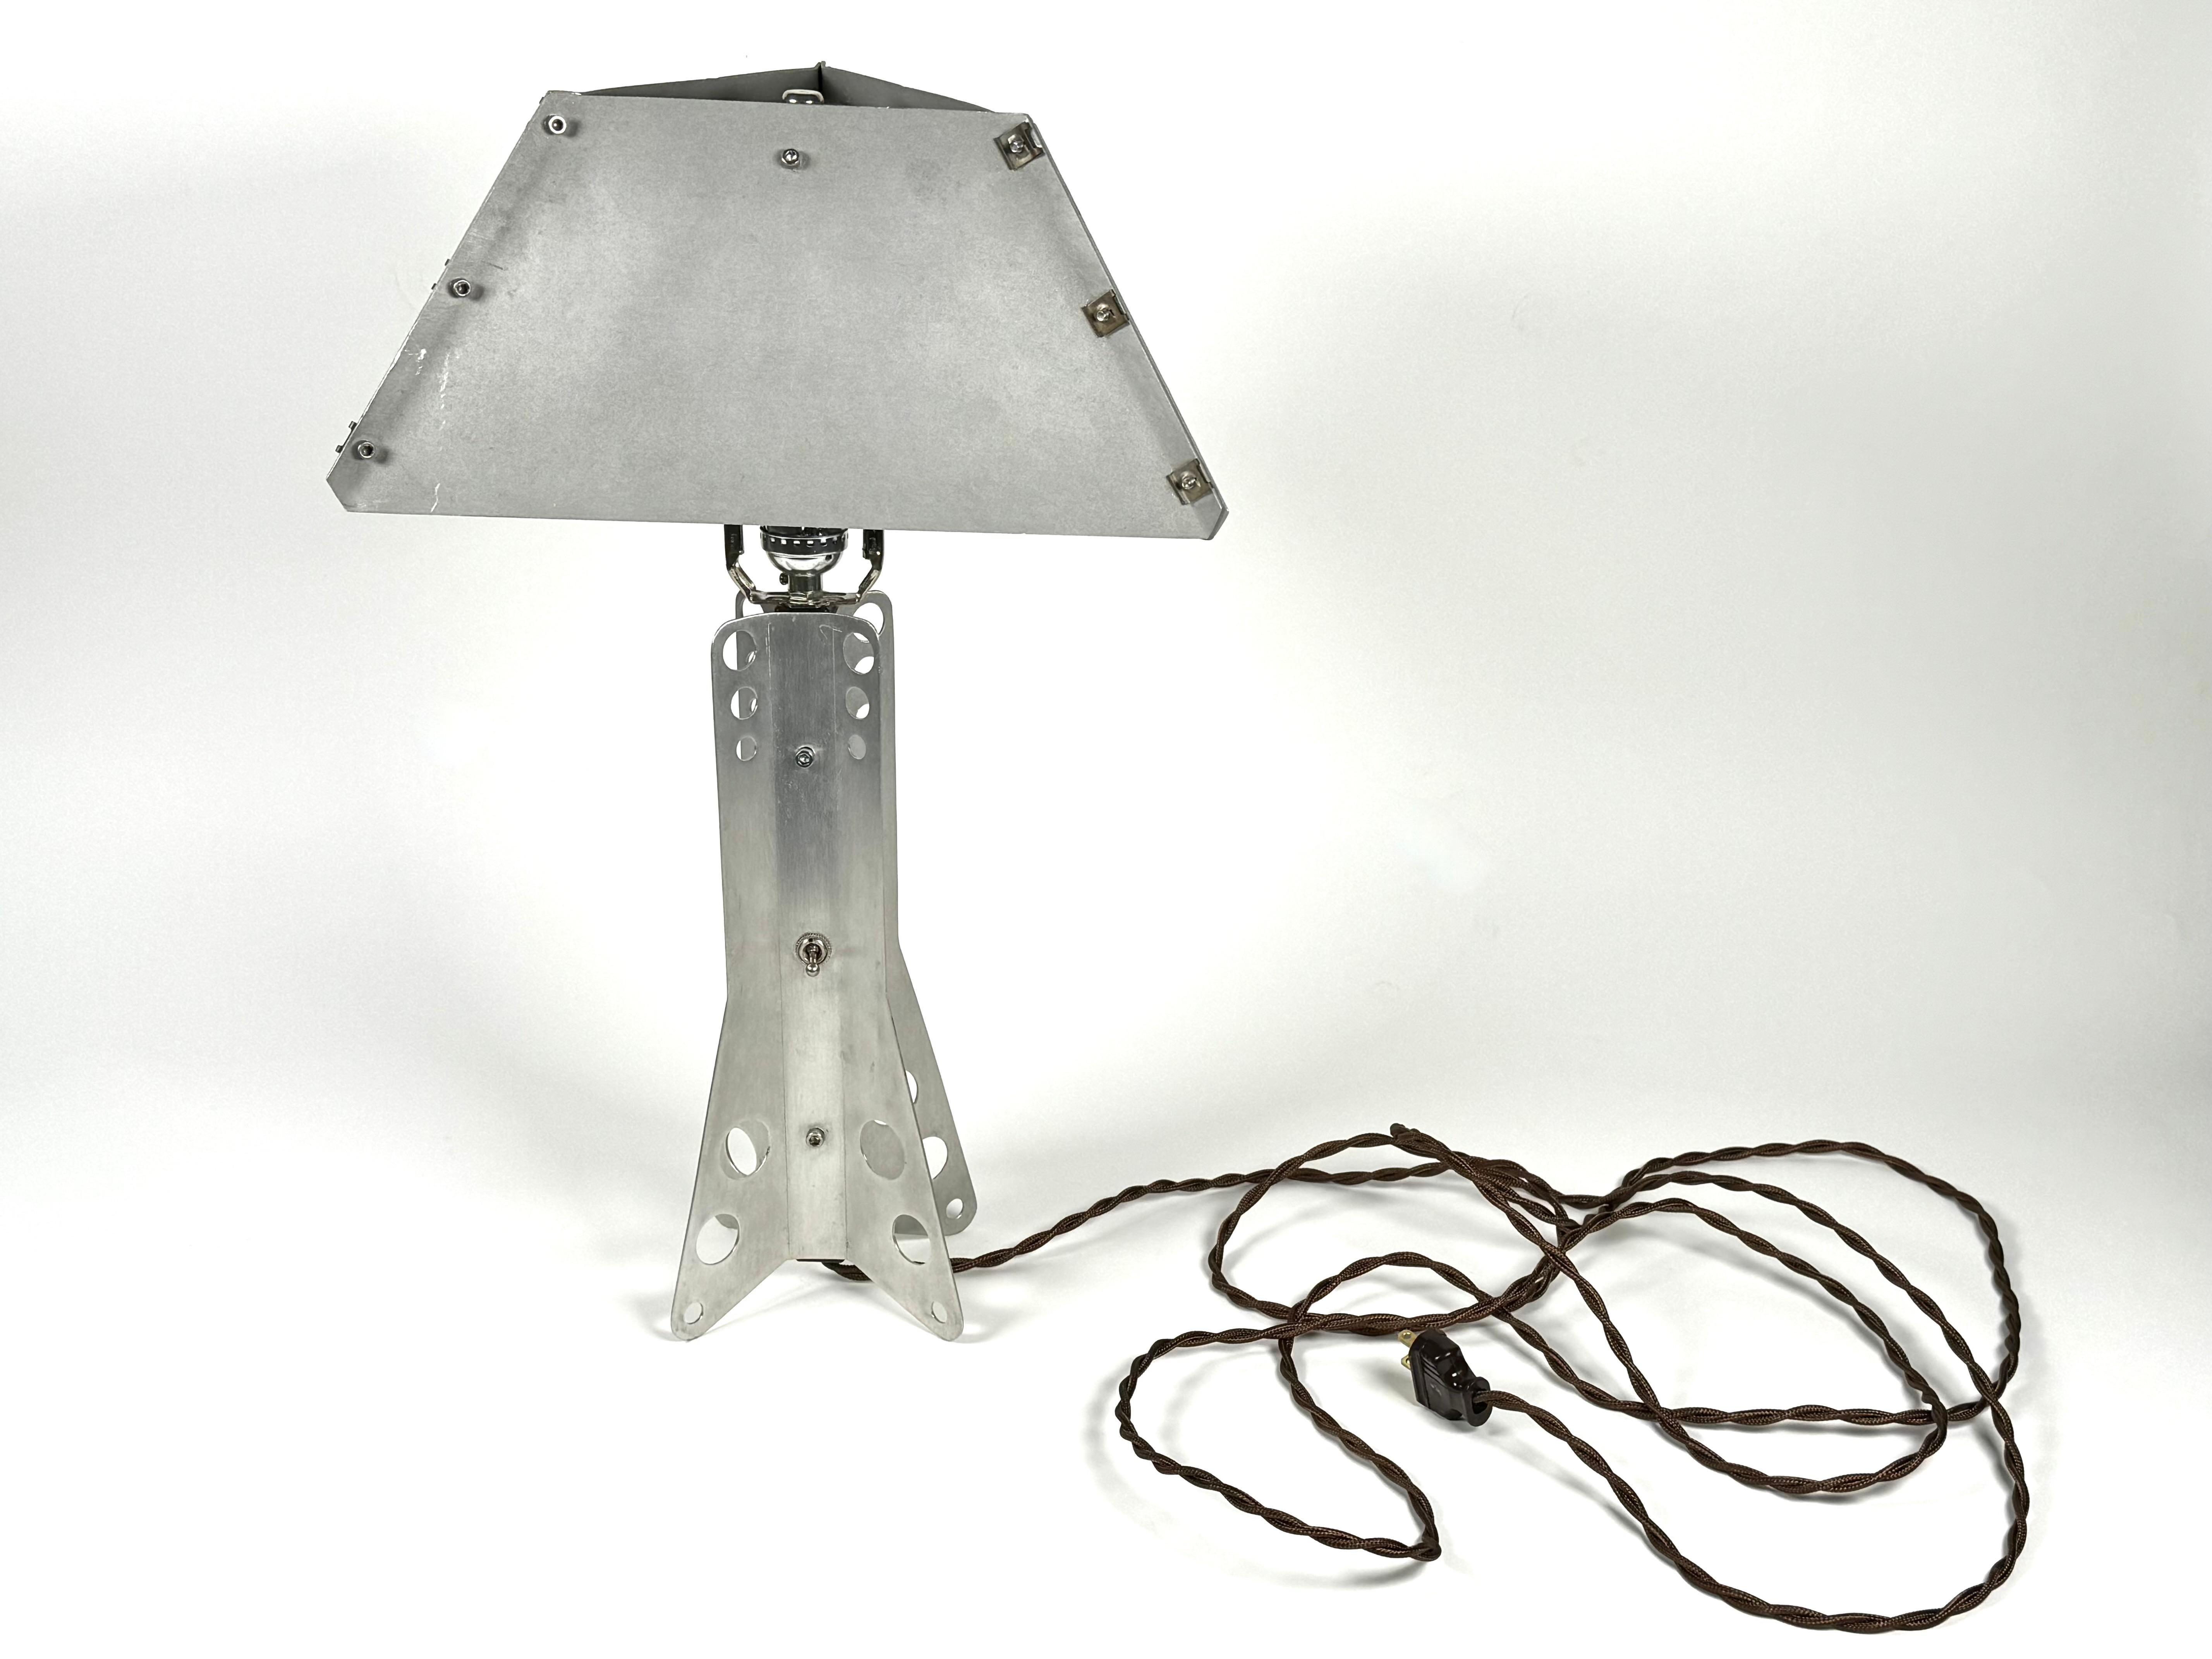 Hand crafted aluminum table lamp with a triangular shaped shade. A unusual piece created out of aluminum sheets fastened with stainless steel hex head screws and aircraft clips. The base is a winged form top and bottom with perforations as part of